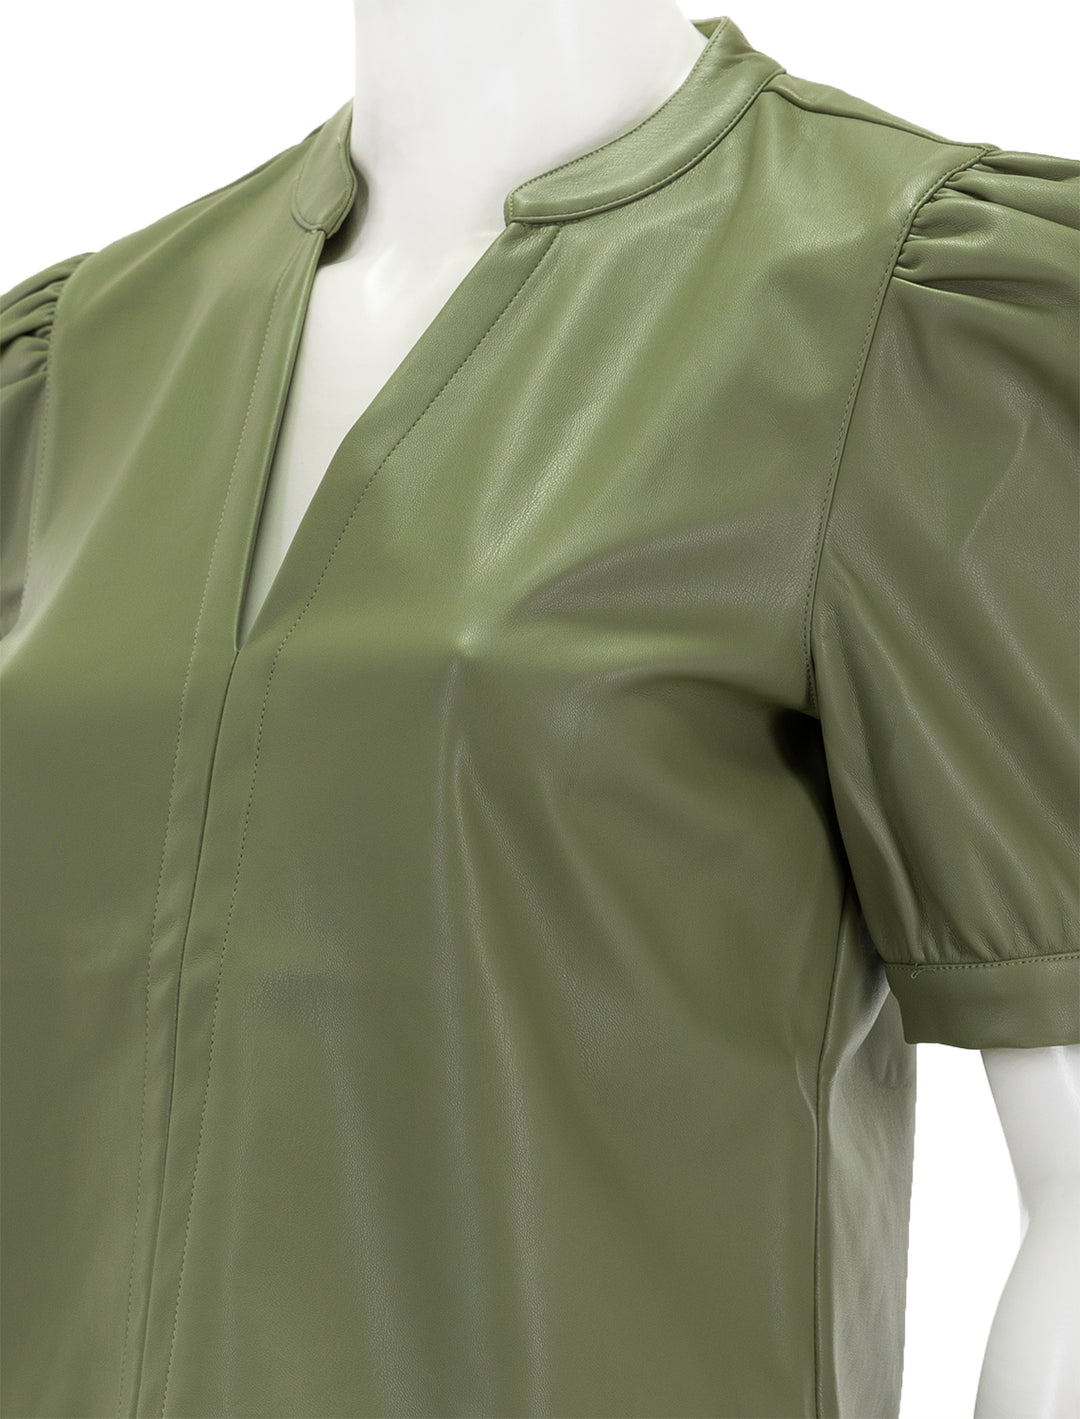 Close-up view of Steve Madden's jane top in dusty olive.